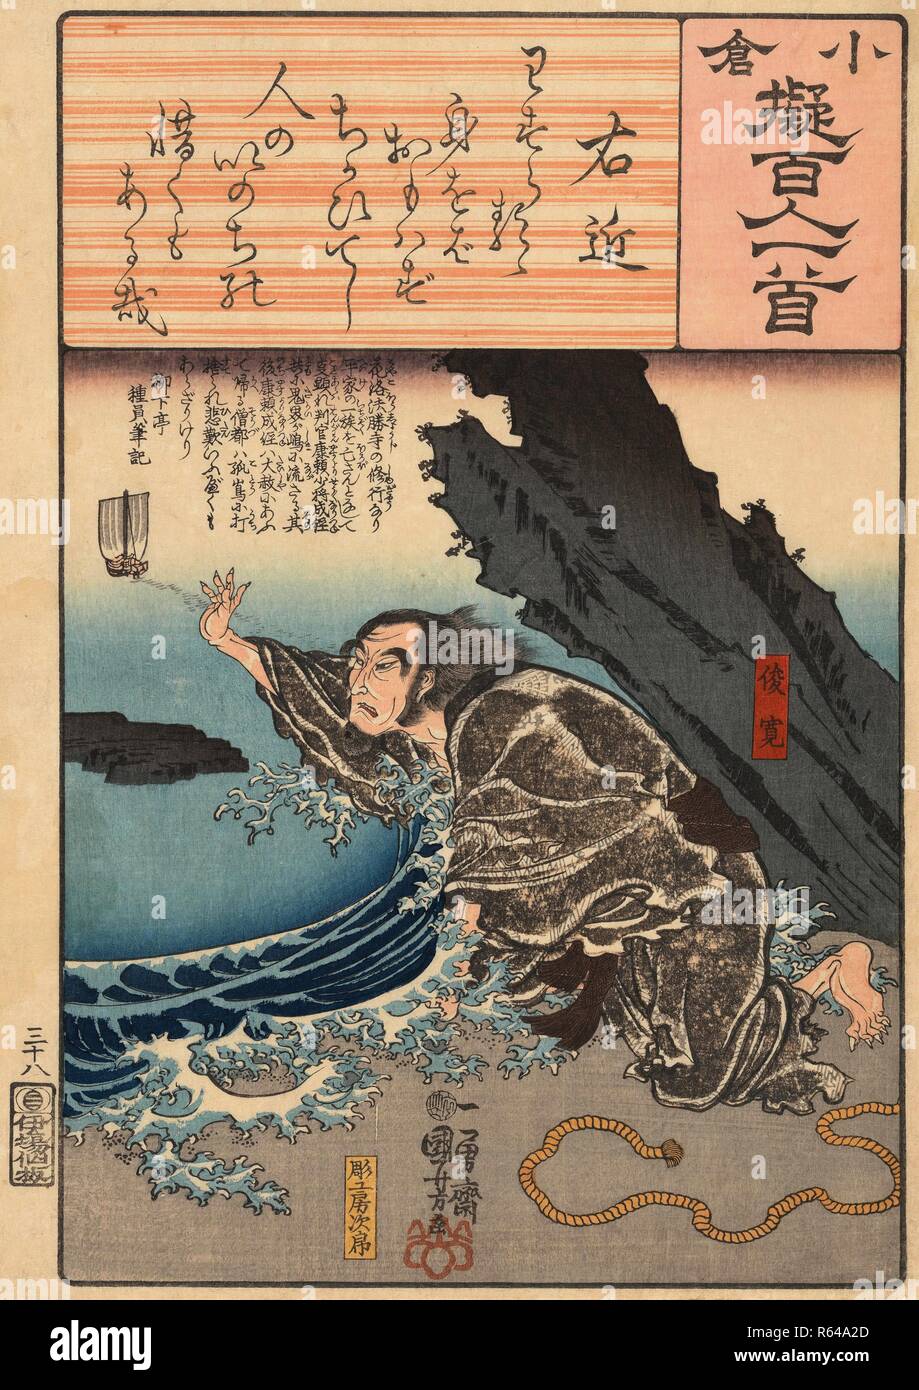 [Poem by] Ukon: Shunkan, from the series Comparisons of the Ogura One Hundred Poets, One Poem Each. Date: 1845-1846. Dimensions: 36 cm x 26 cm. Museum: Van Gogh Museum, Amsterdam. Author: KUNIYOSHI, UTAGAWA. Stock Photo